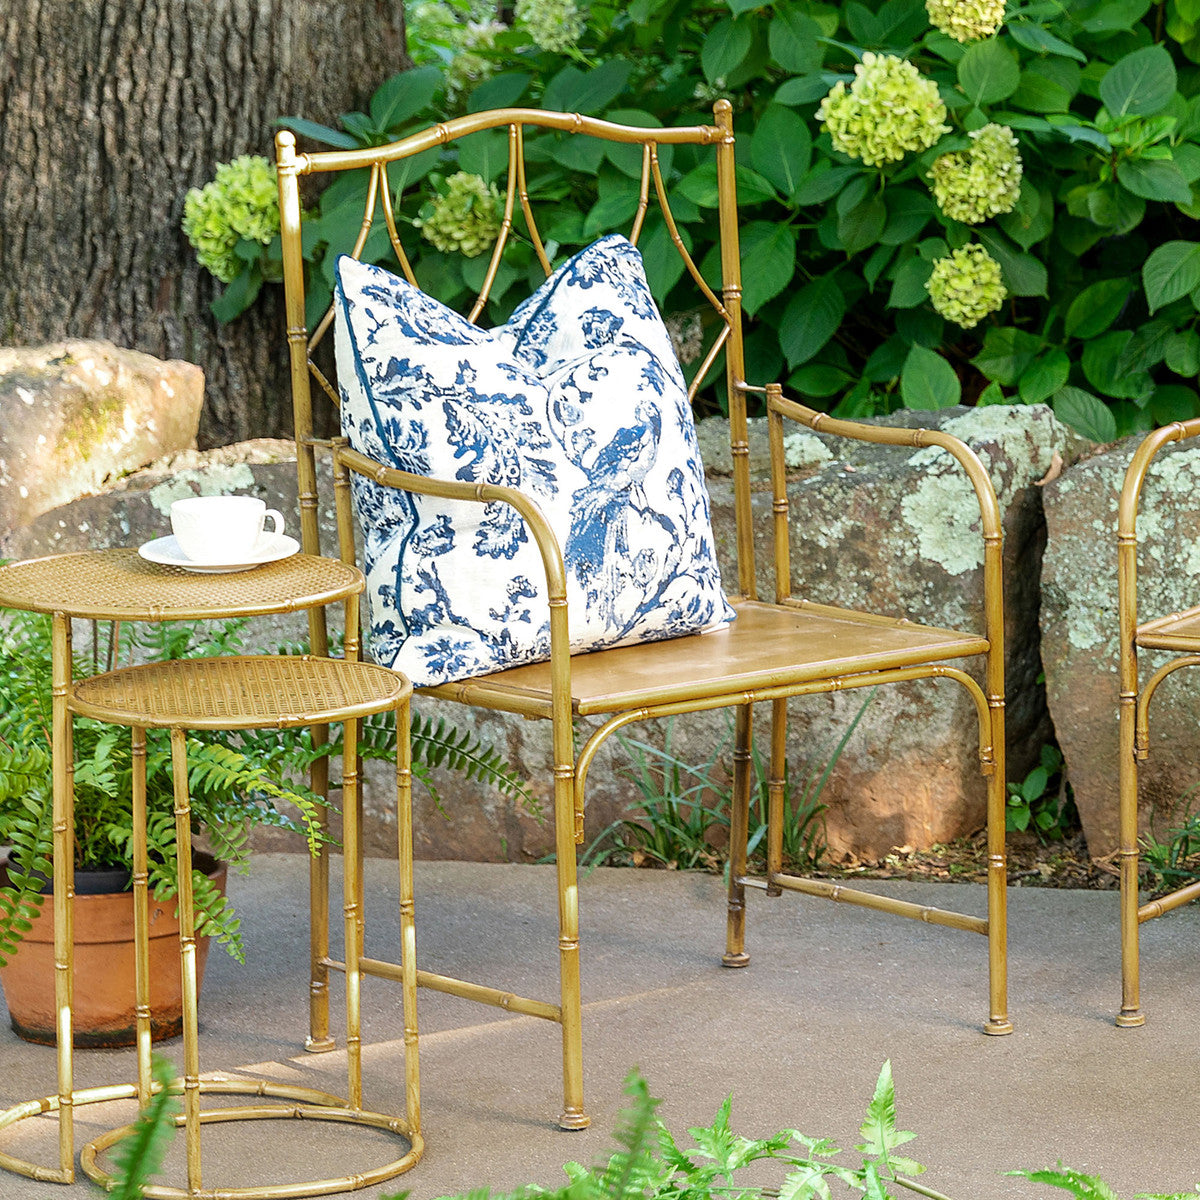 A Park Hill metal bamboo porch chair with a blue and white patterned cushion in a garden setting with a matching side table and cup.